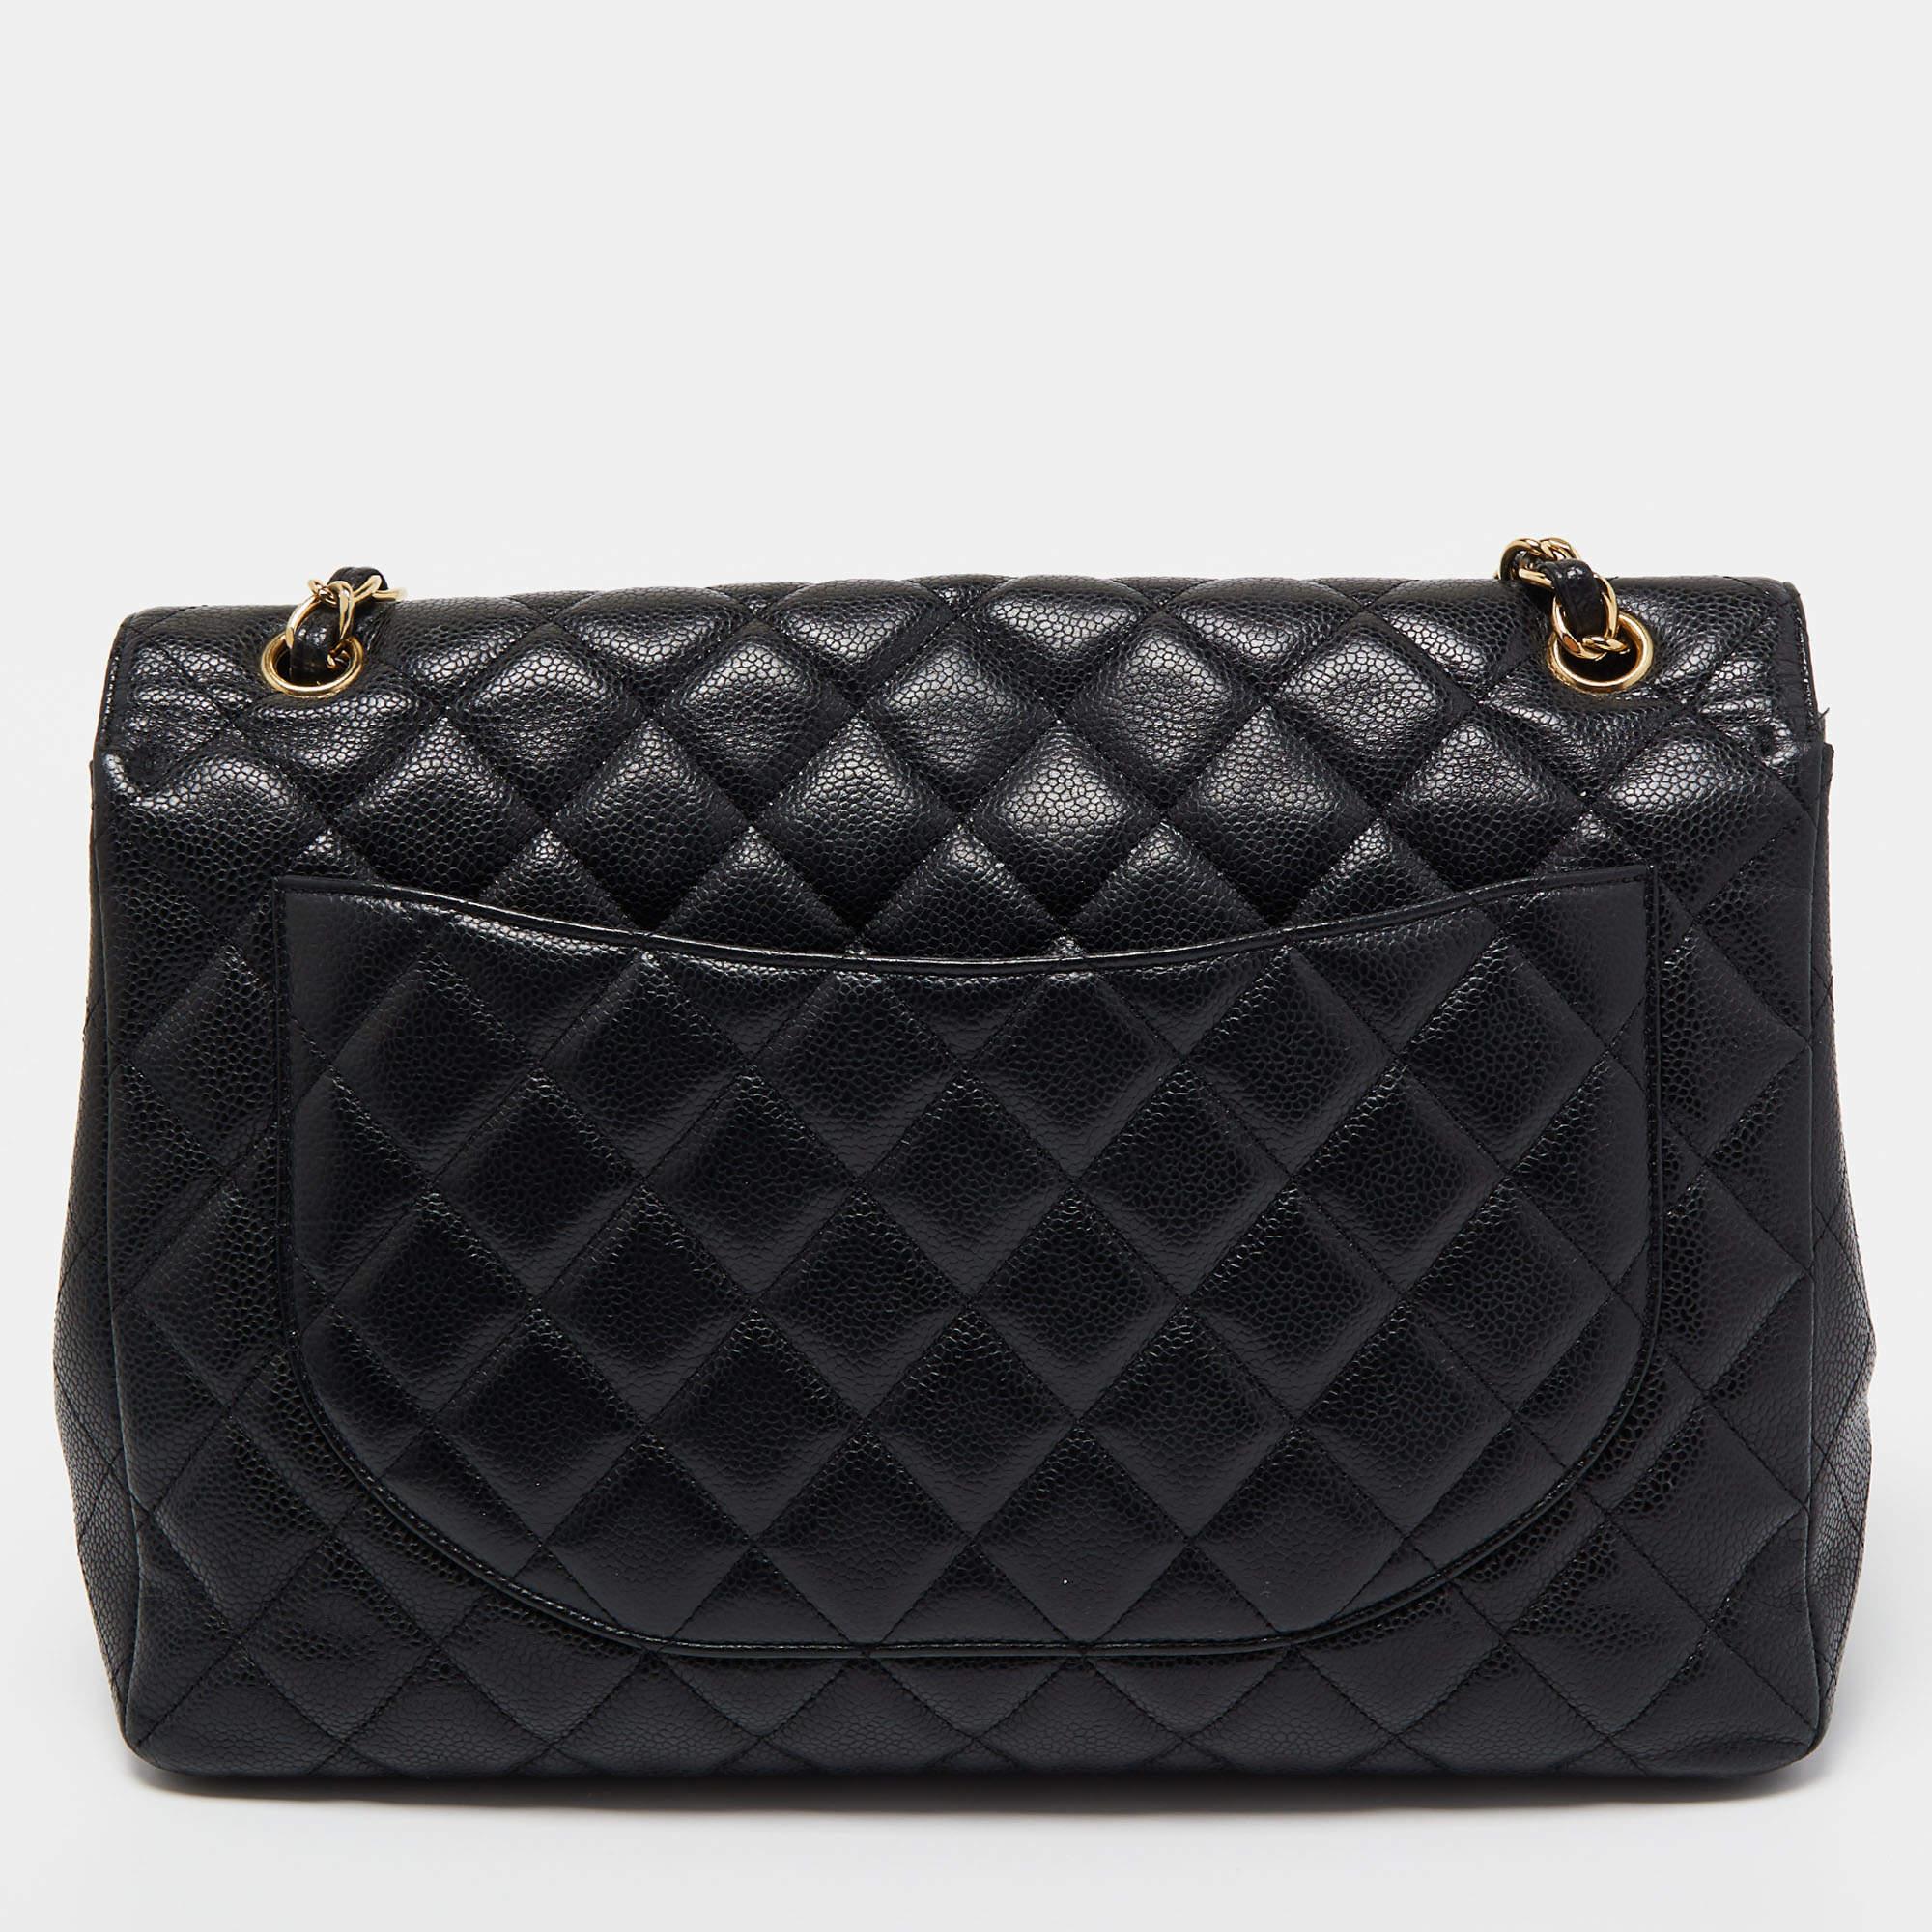 Women's Chanel Black Quilted Caviar Leather Maxi Classic Single Flap Bag For Sale